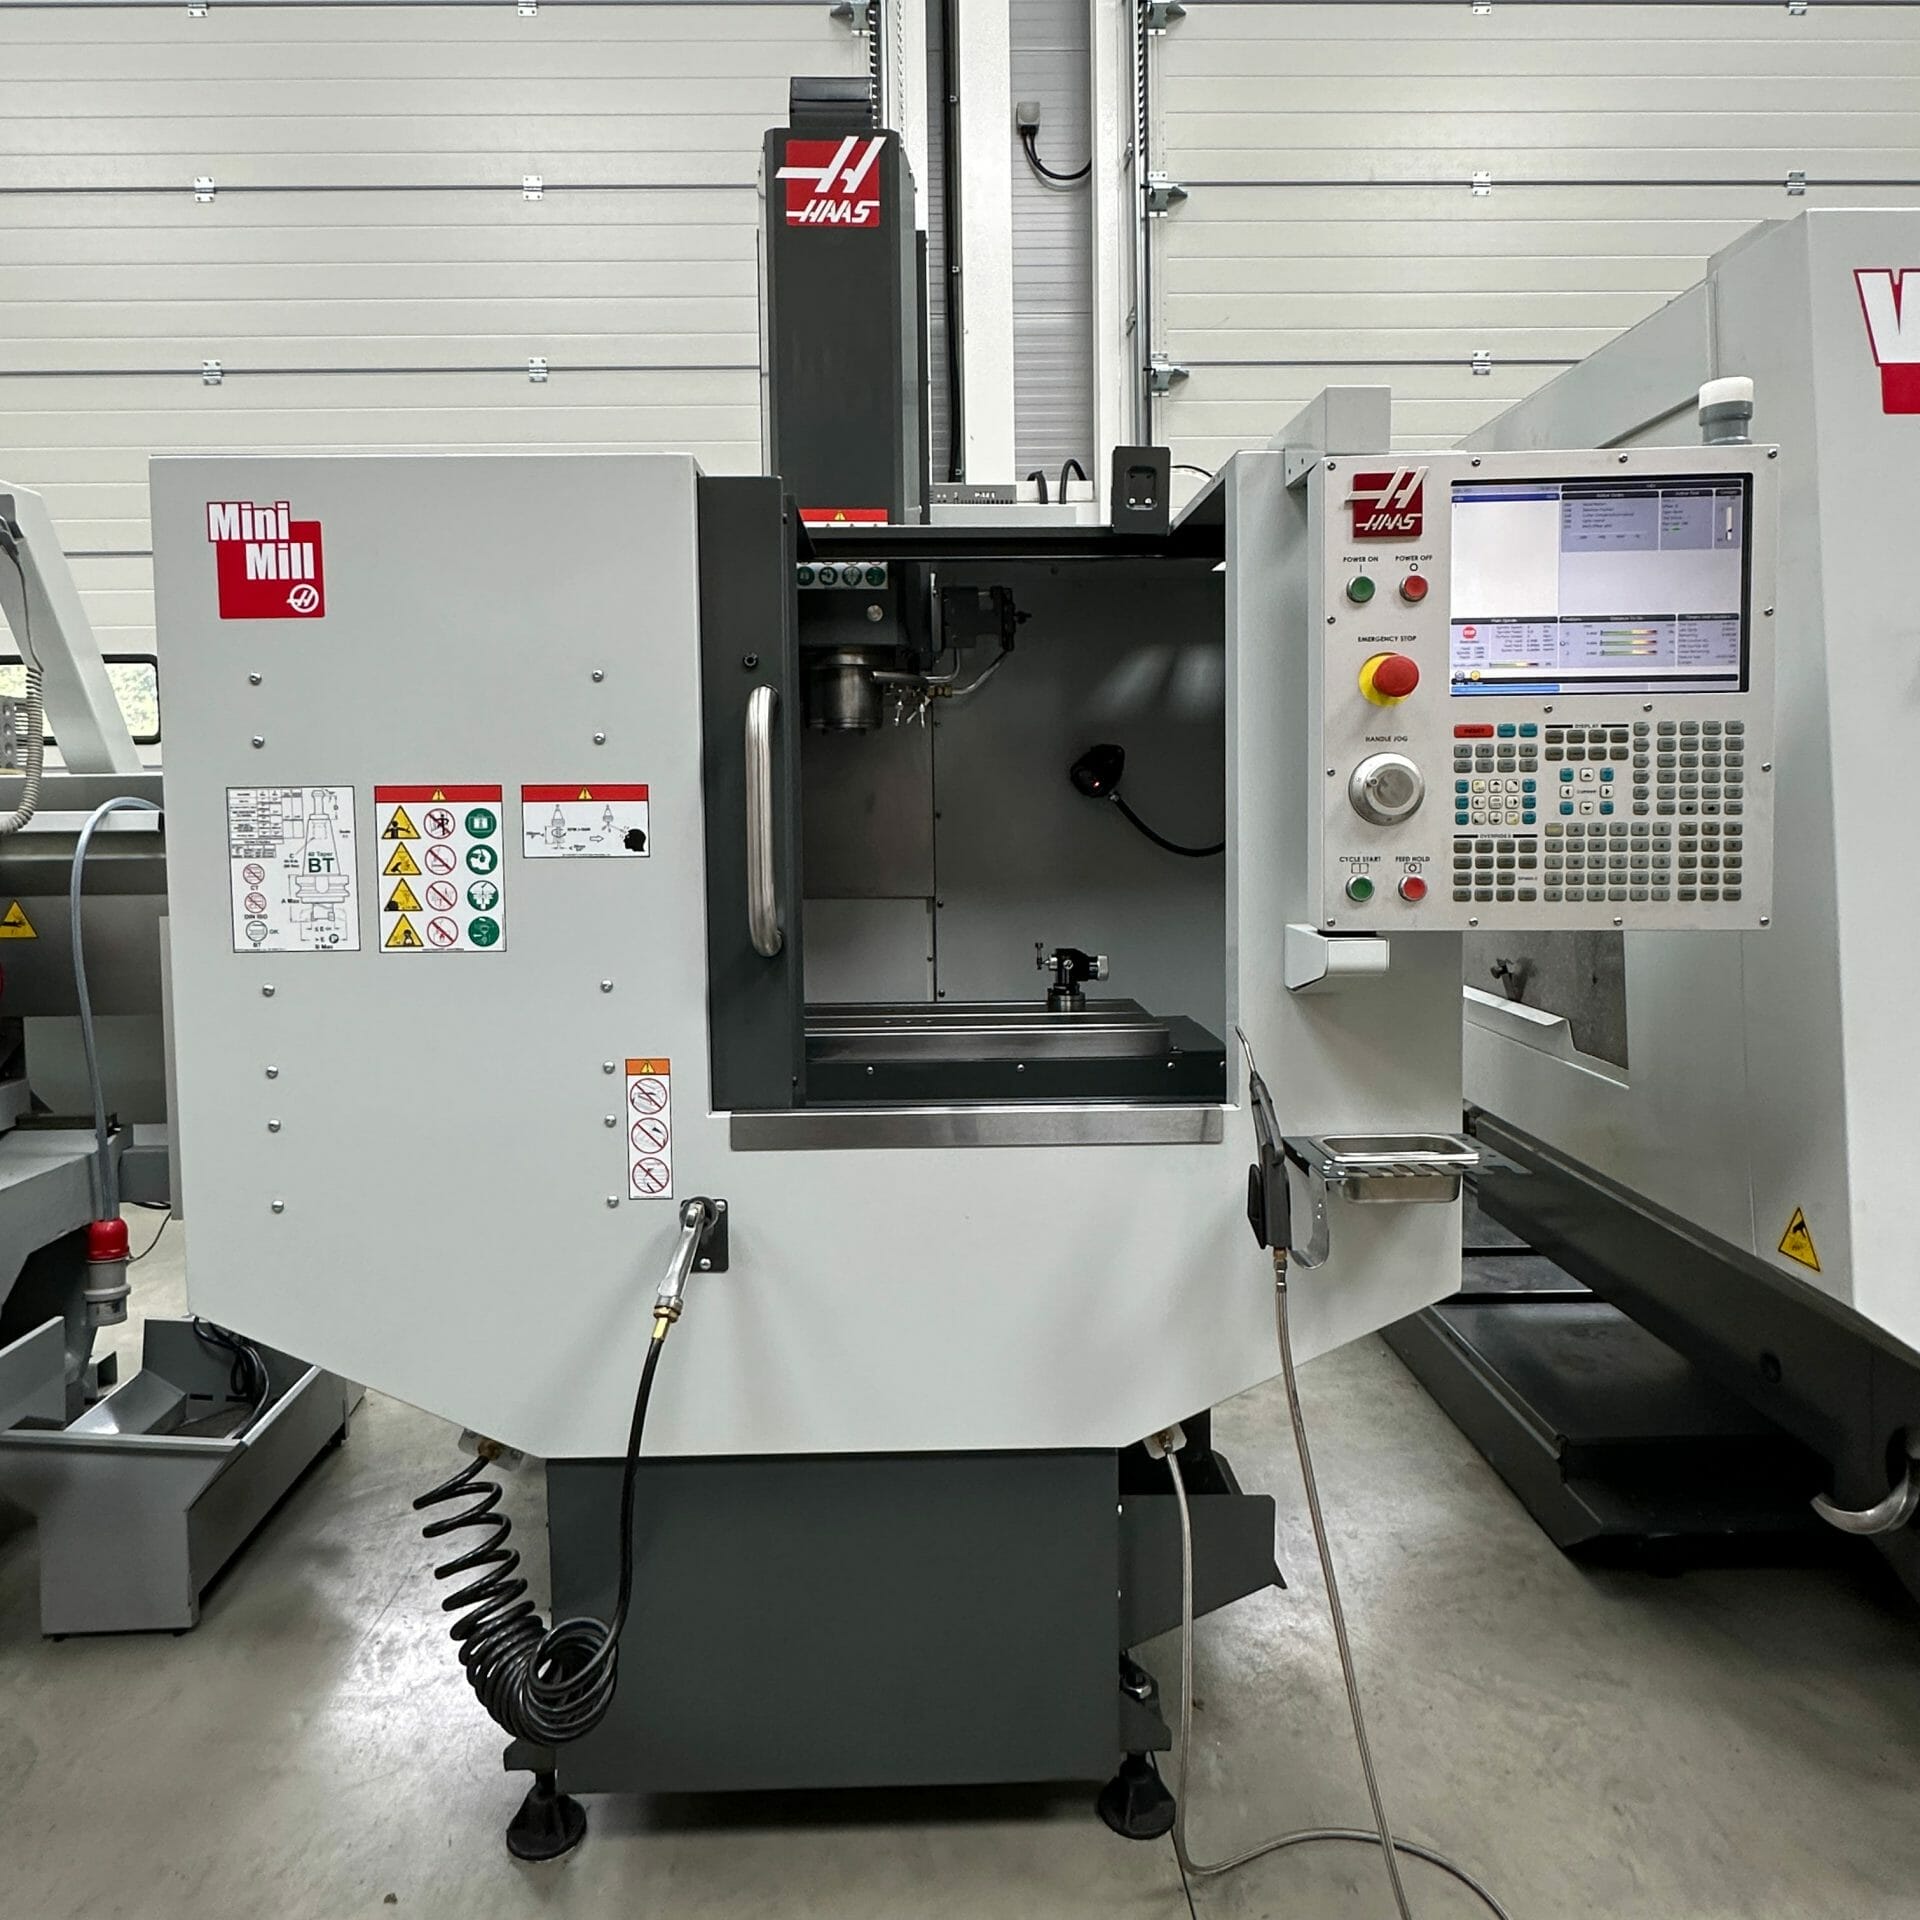 Pre-Owned Haas Mini Mill